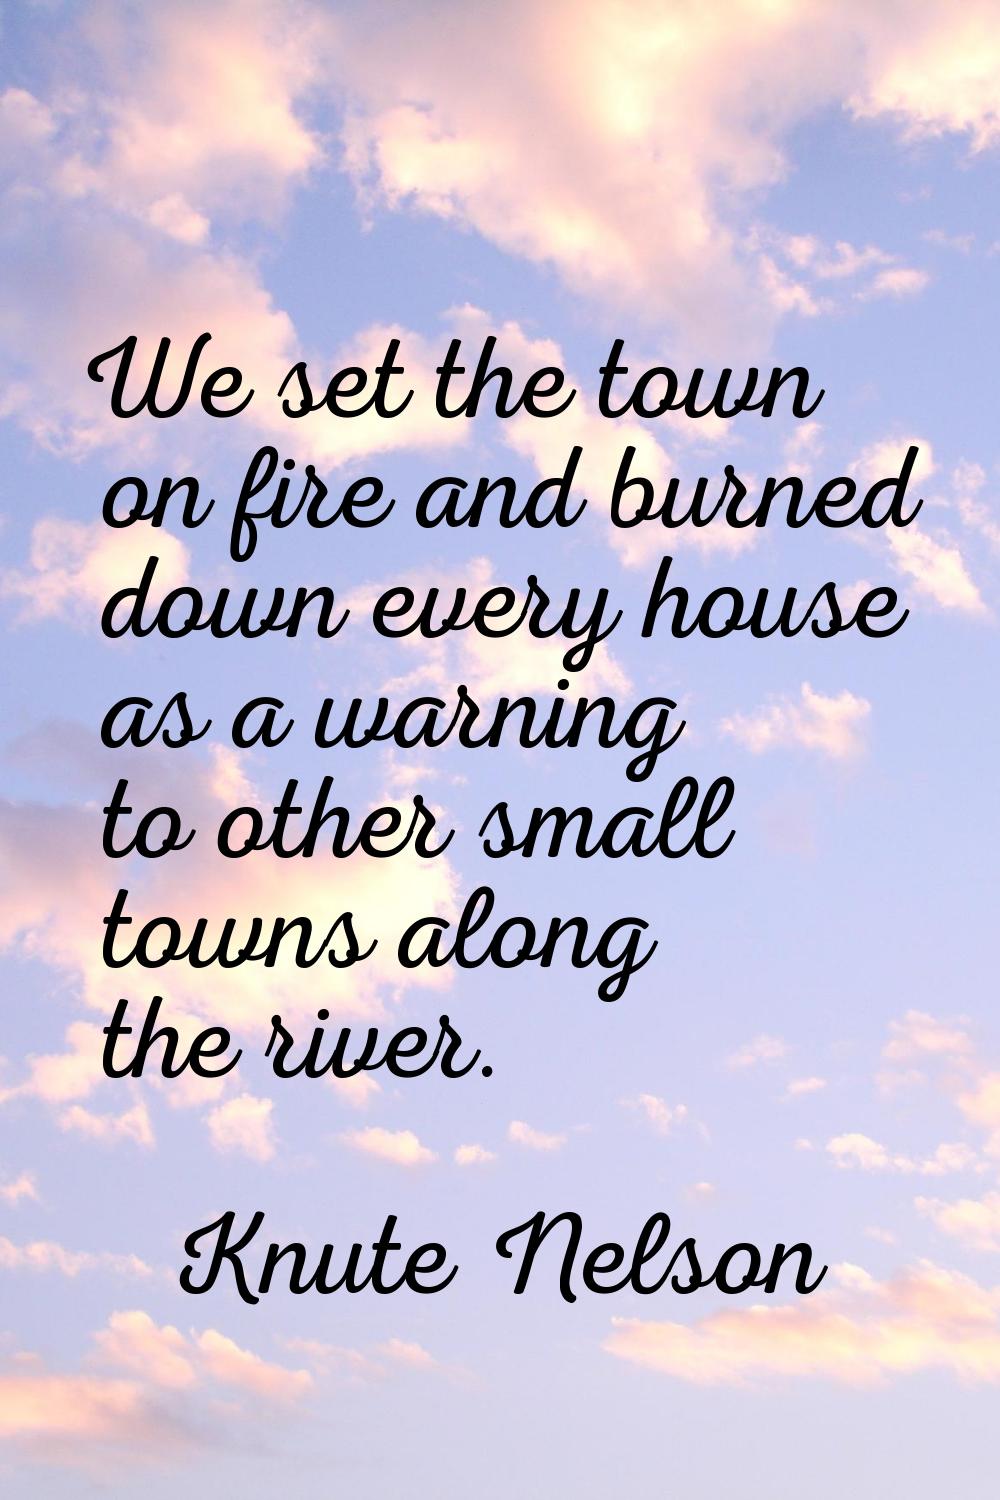 We set the town on fire and burned down every house as a warning to other small towns along the riv